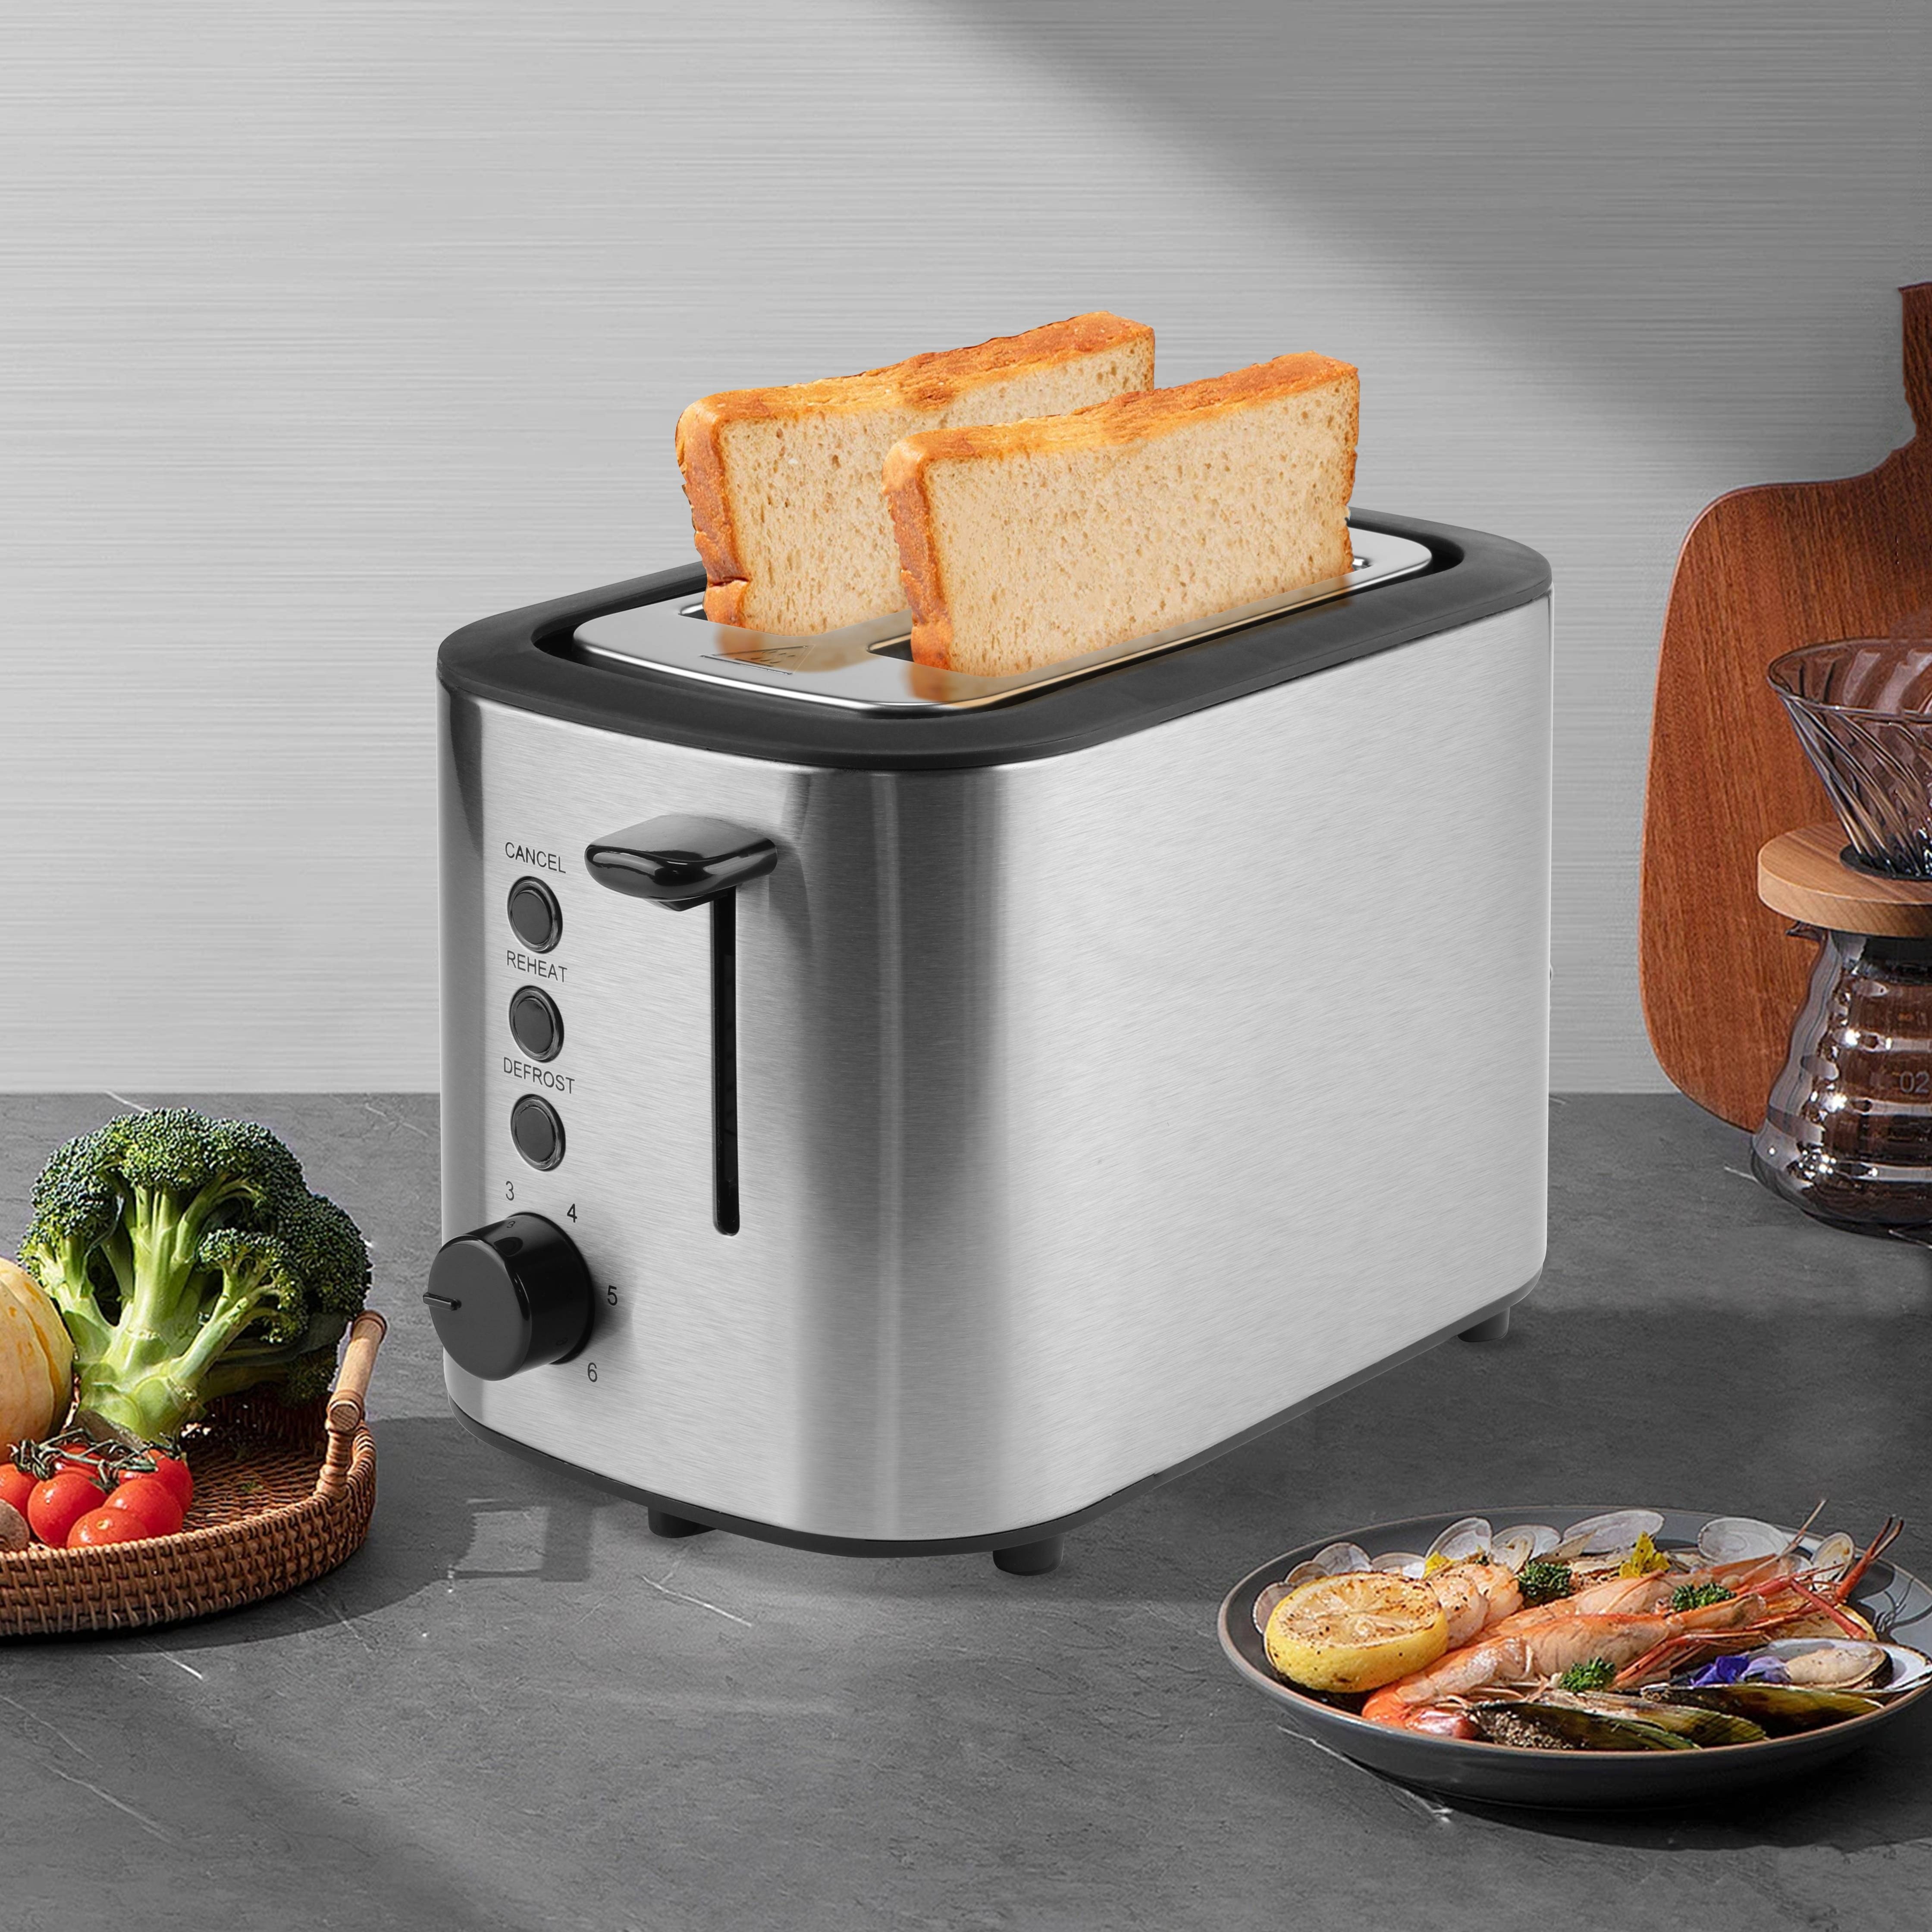 Mellerware Home Appliances - Enjoy crispy, fresh toast with the Mellerware  2 slice Vesta toaster. The Vesta 2 slice toaster has bread centering and  wide slots for thick or thin bread. Its